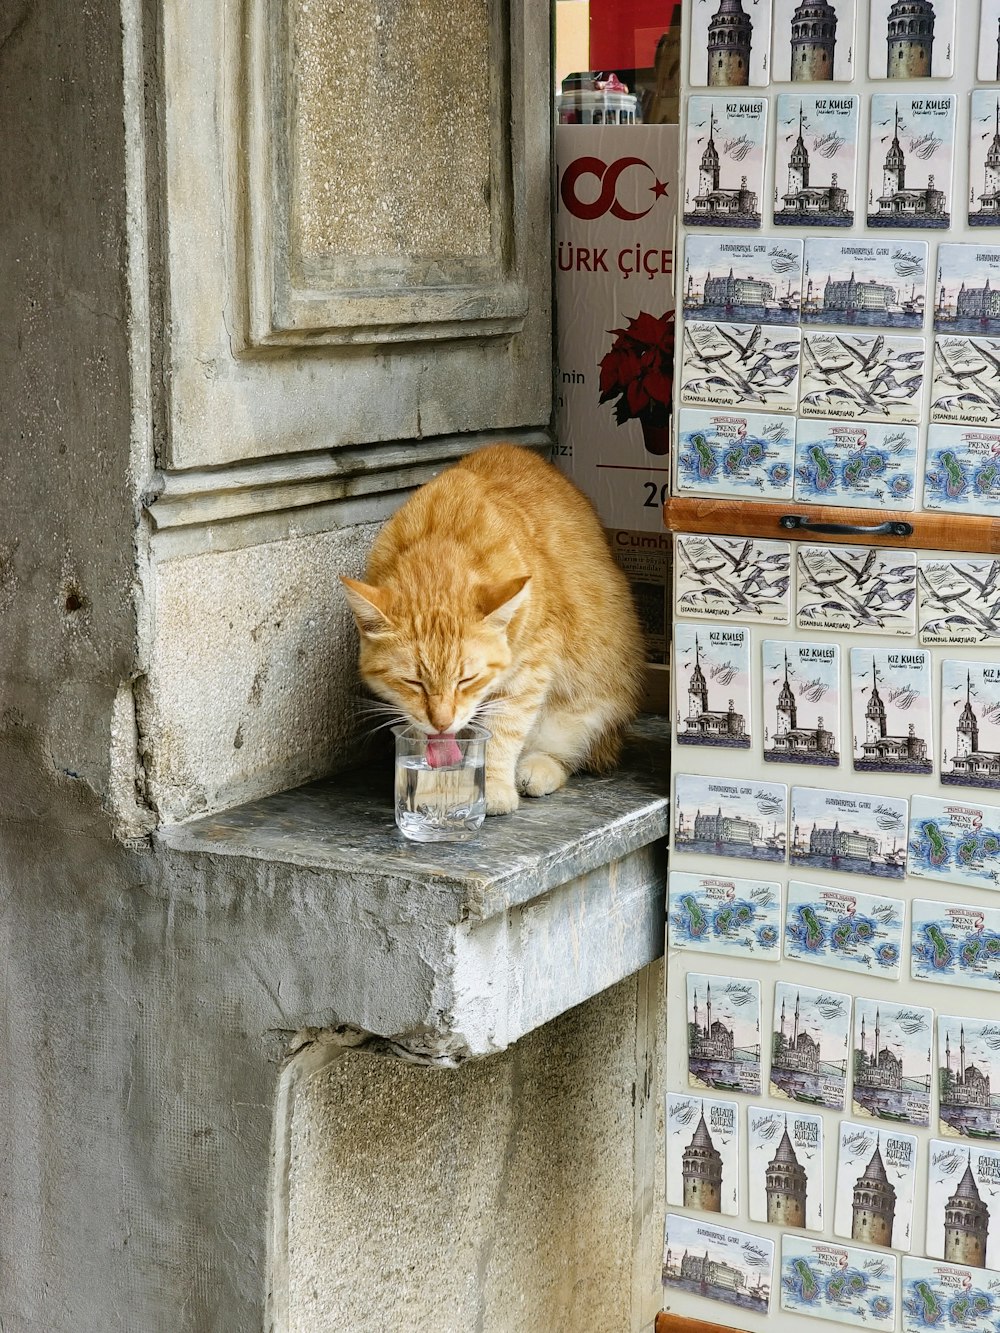 a cat sitting on a ledge drinking from a cup